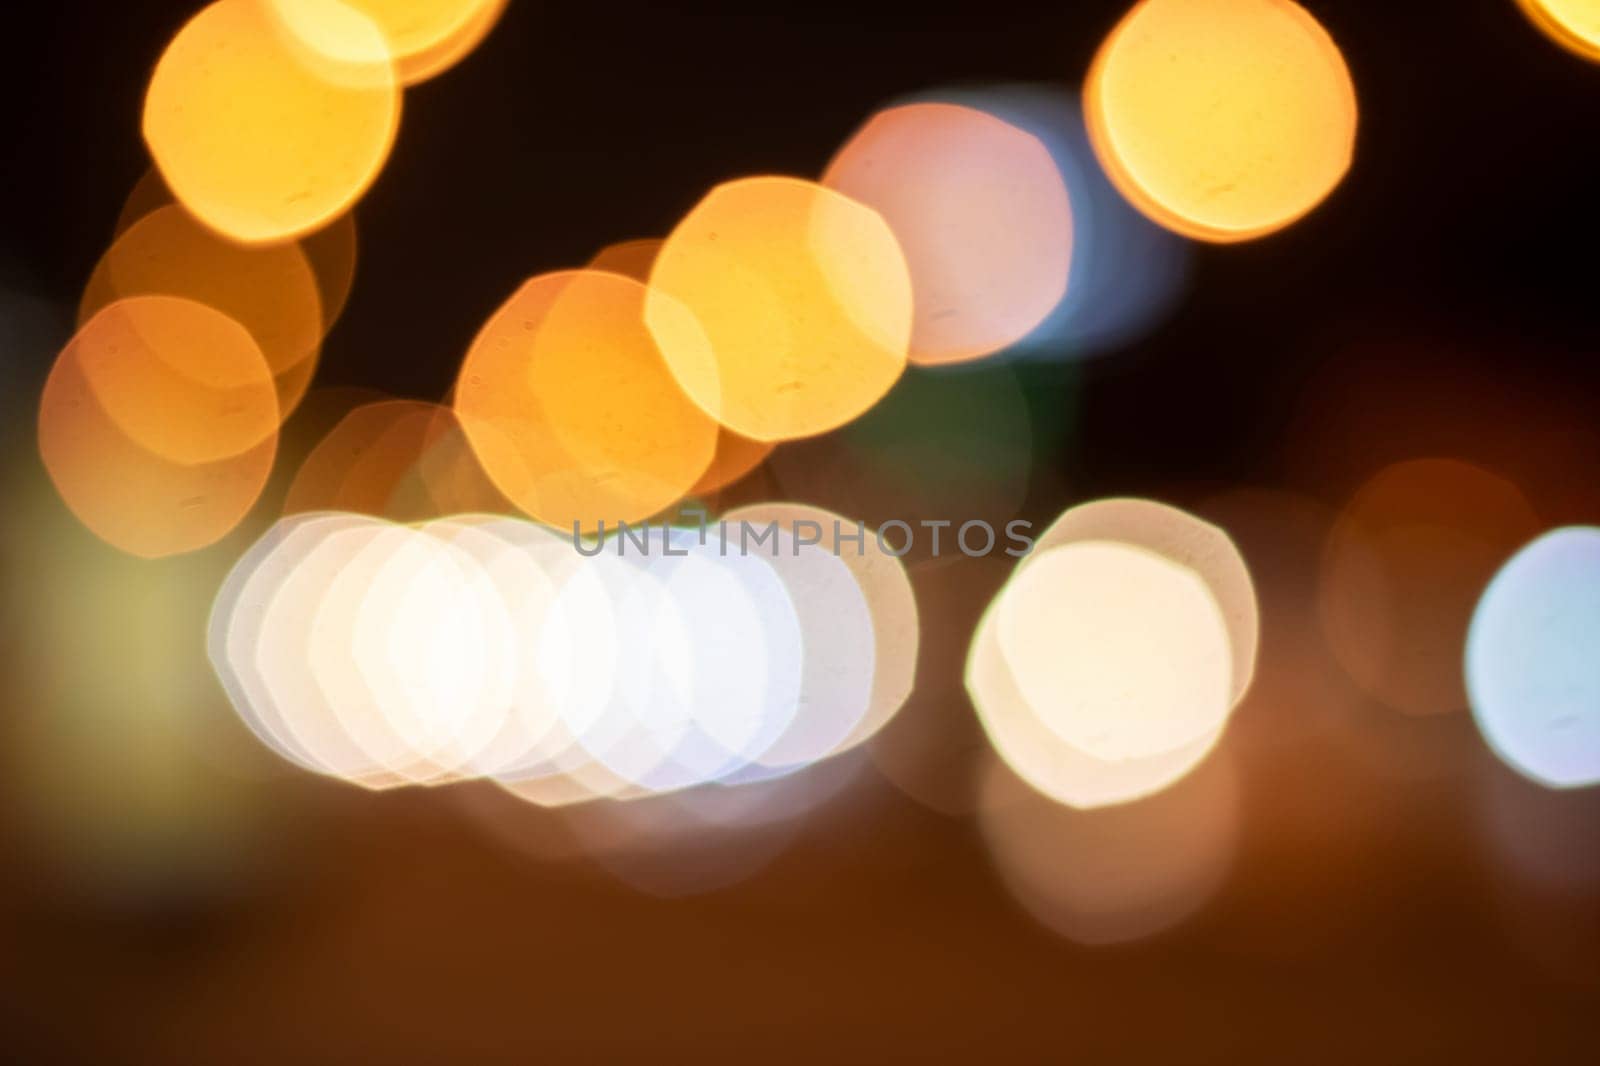 Bright red and yellow lights, blurred background by Vera1703